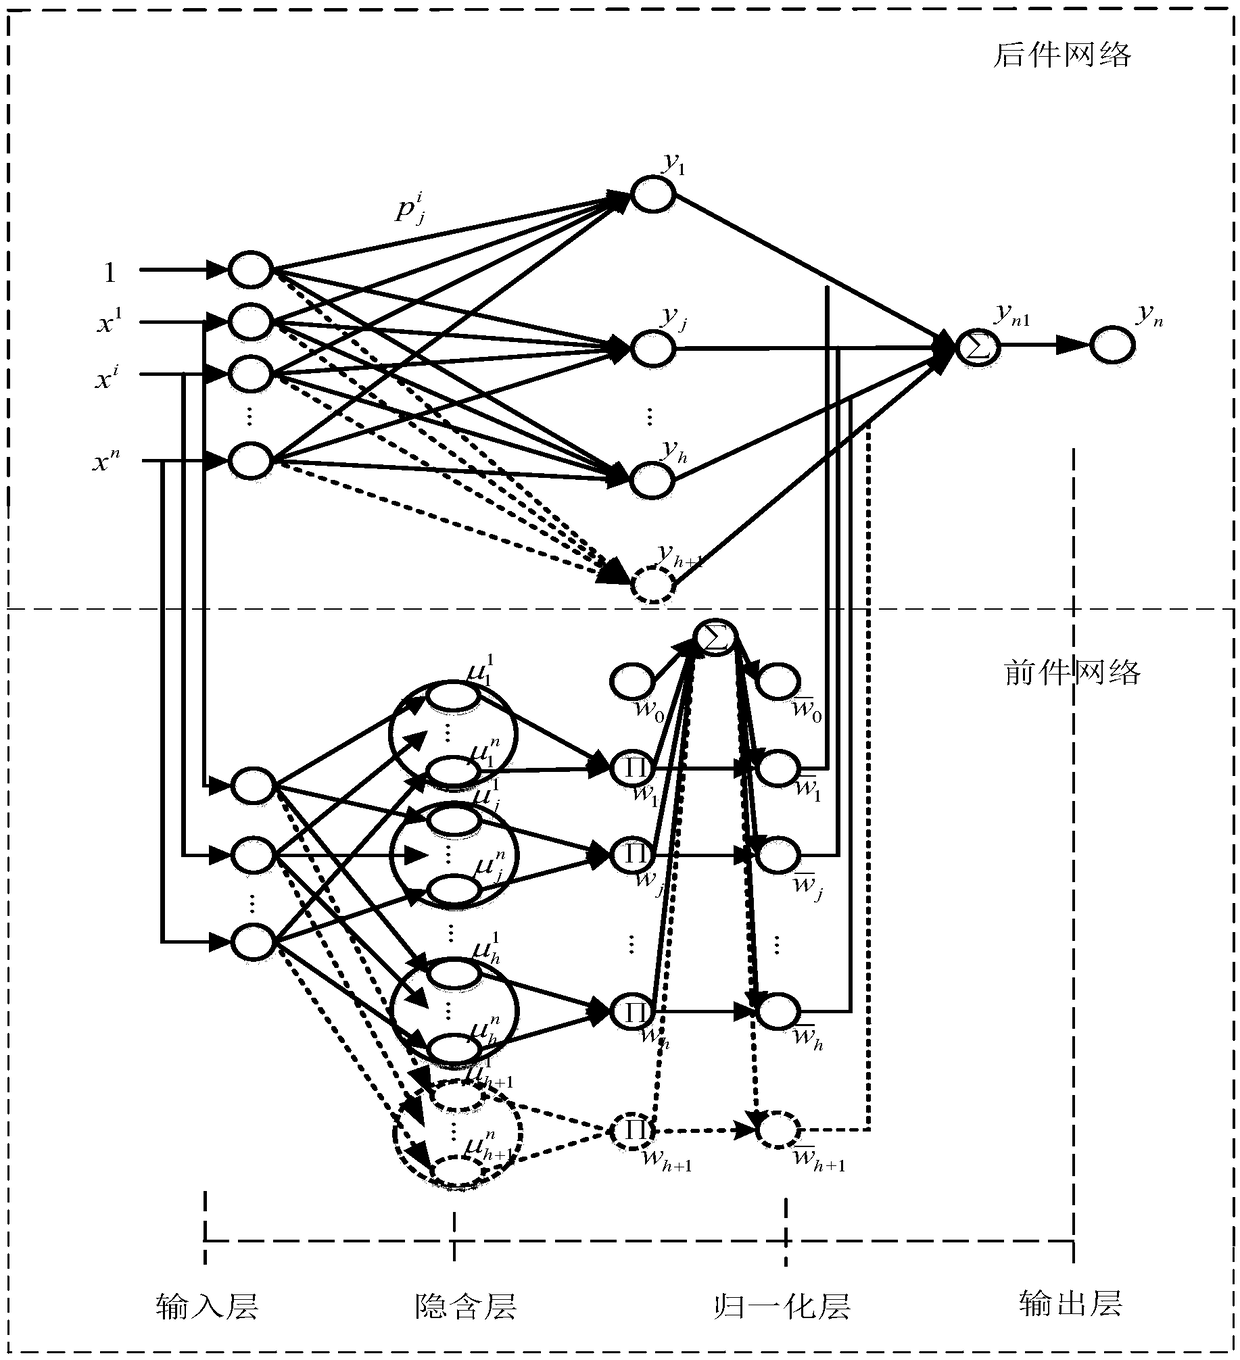 A self-organizing TS fuzzy network modeling method for infrared flame recognition